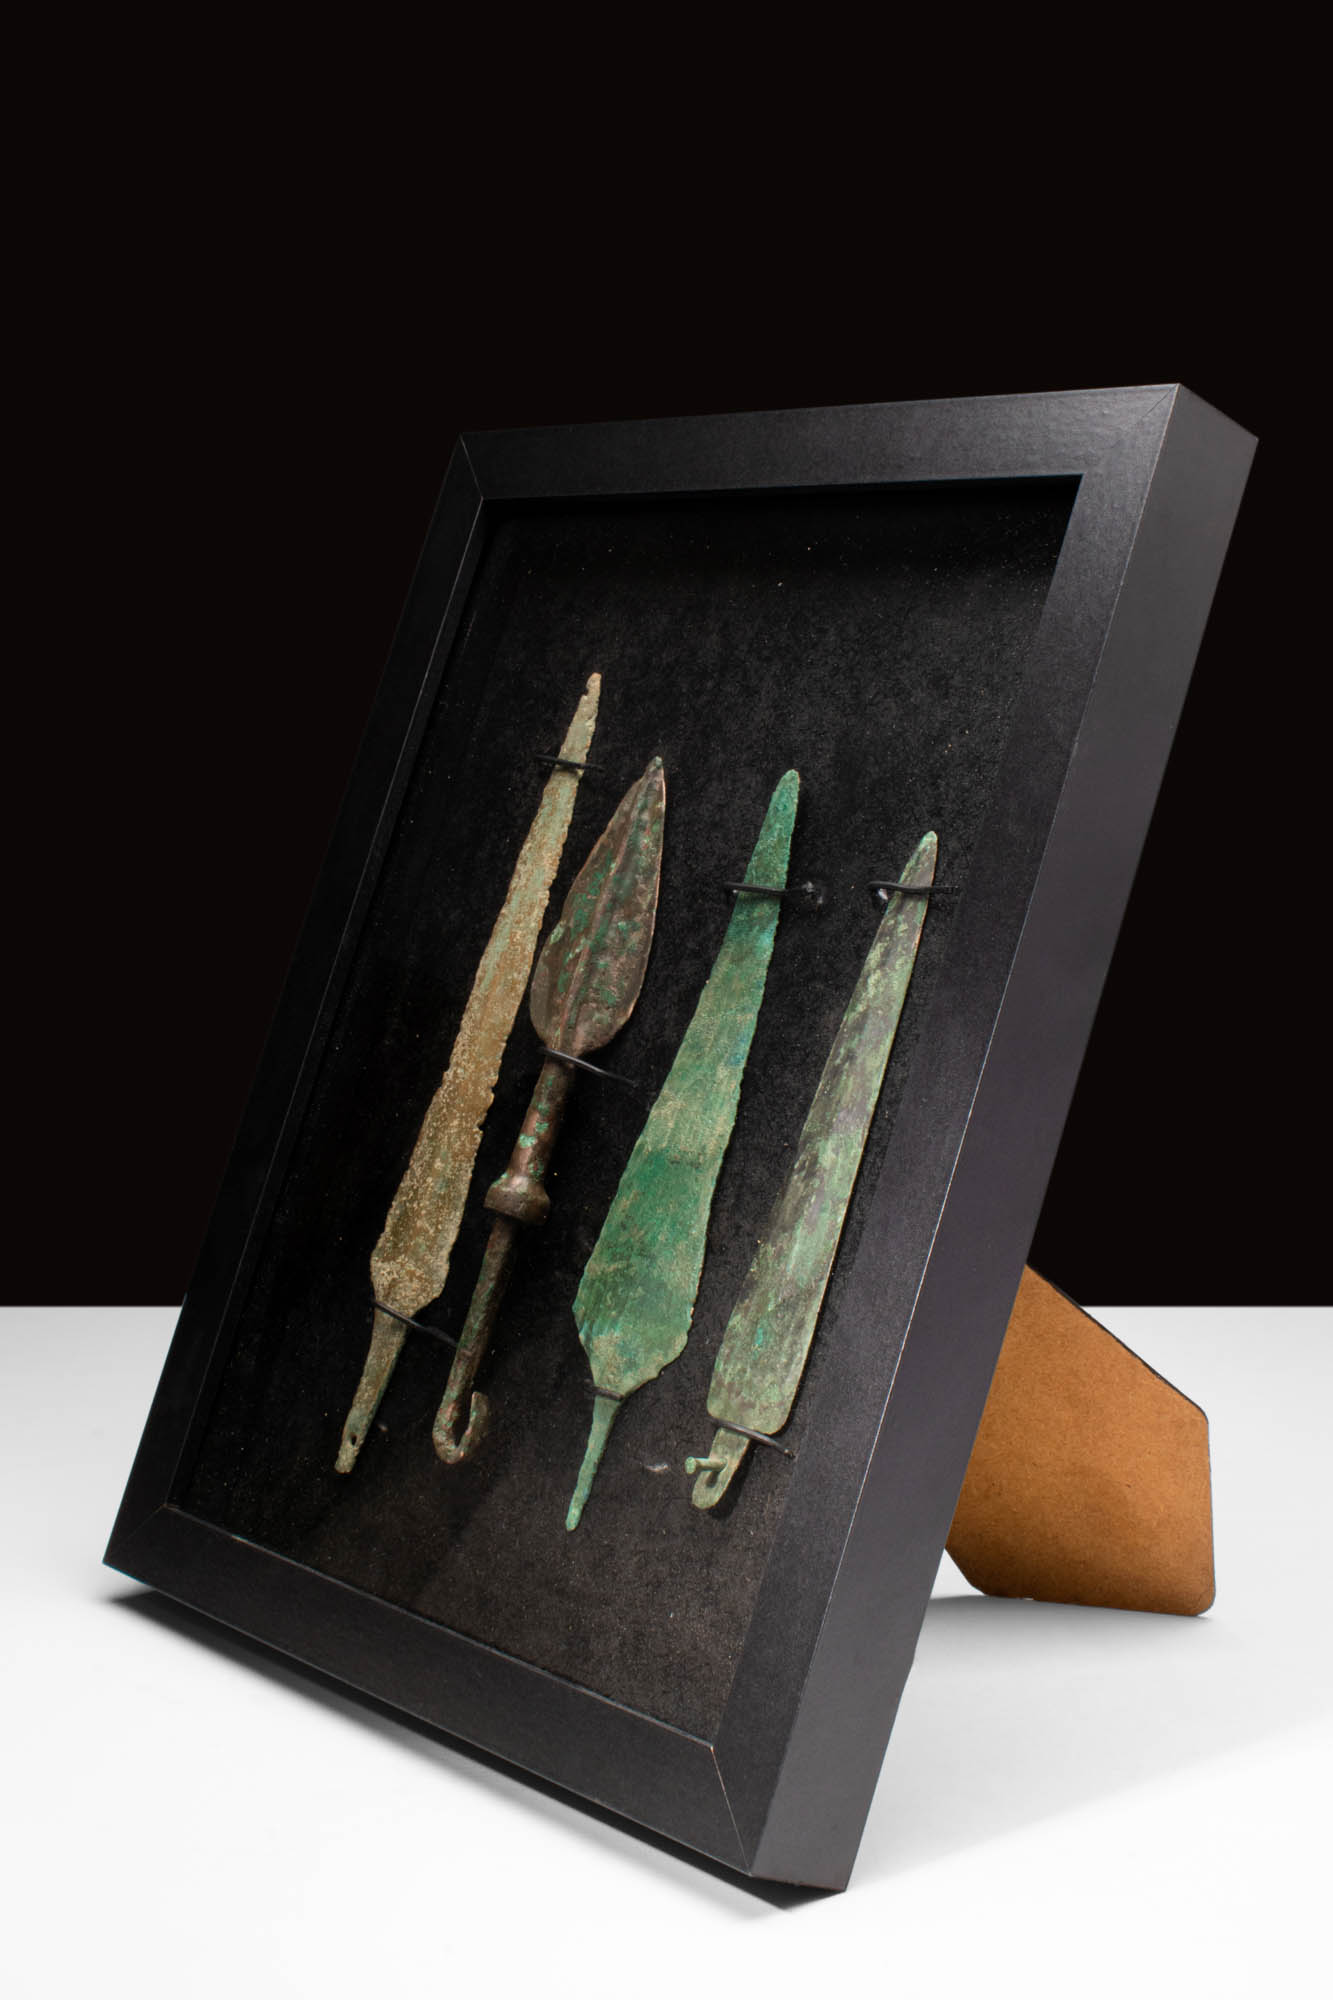 ANCIENT BRONZE AGE WEAPONS - Image 2 of 3